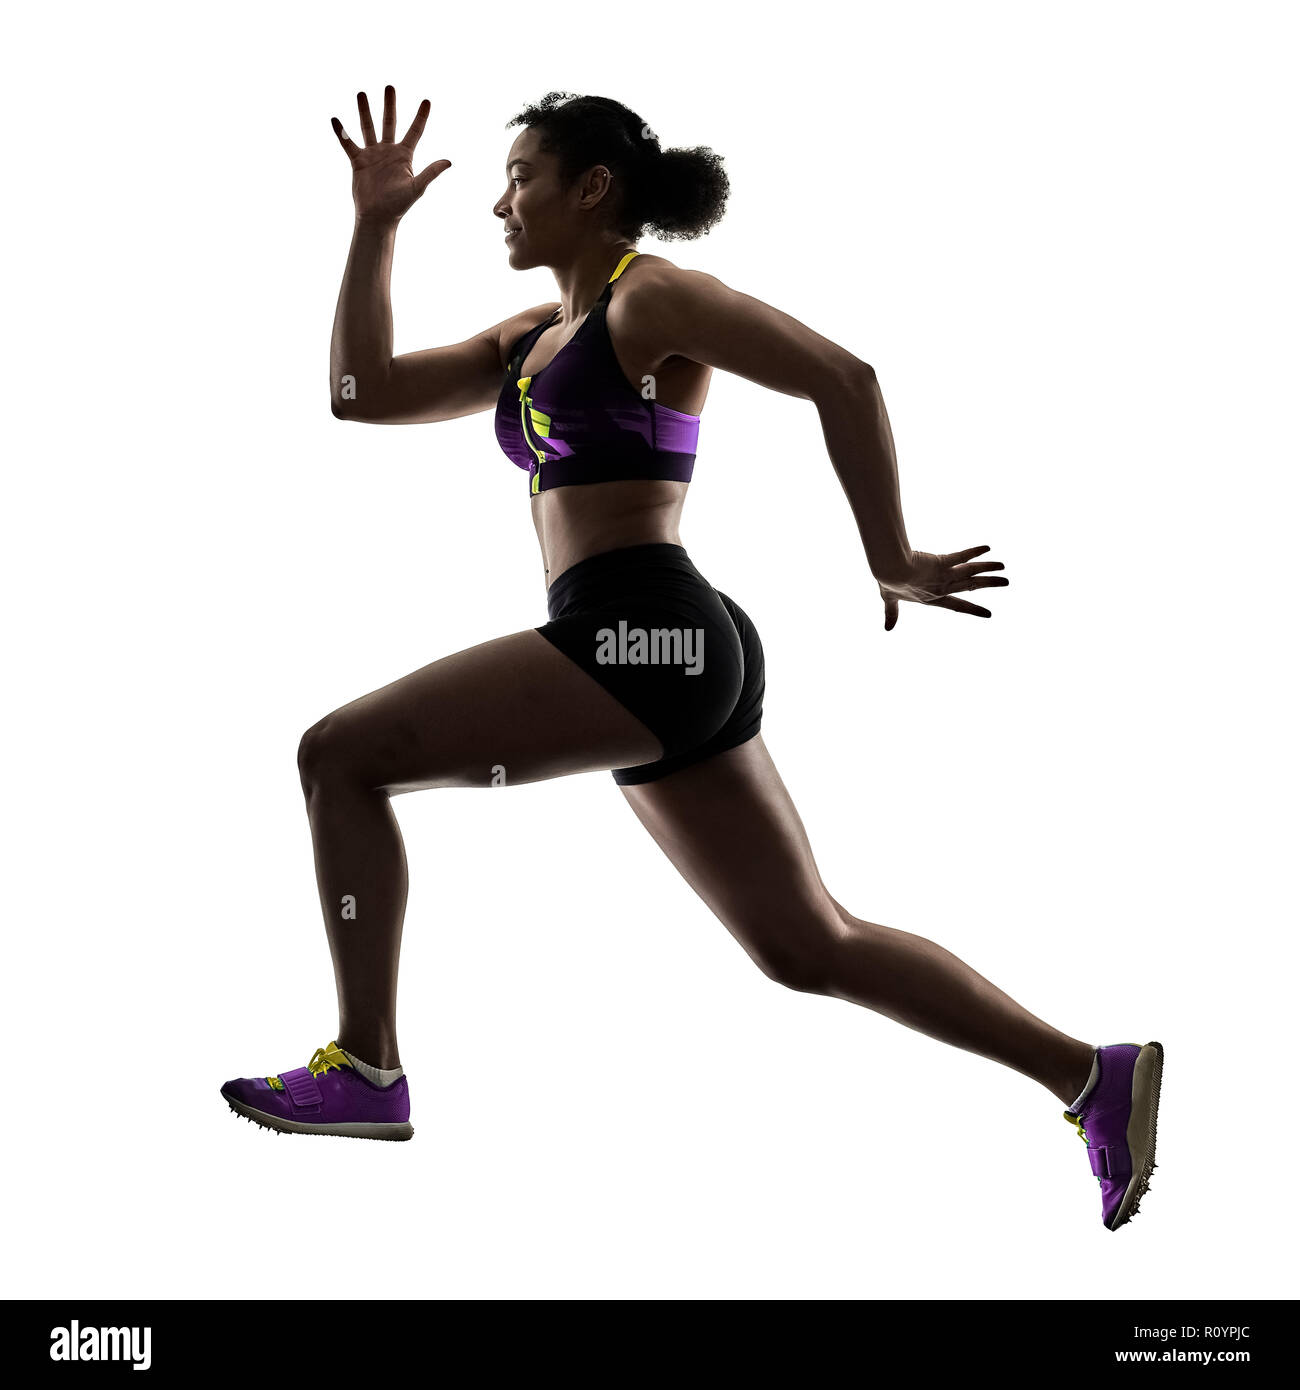 one african runner running sprinter sprinting woman isolated on white background silhouette Stock Photo